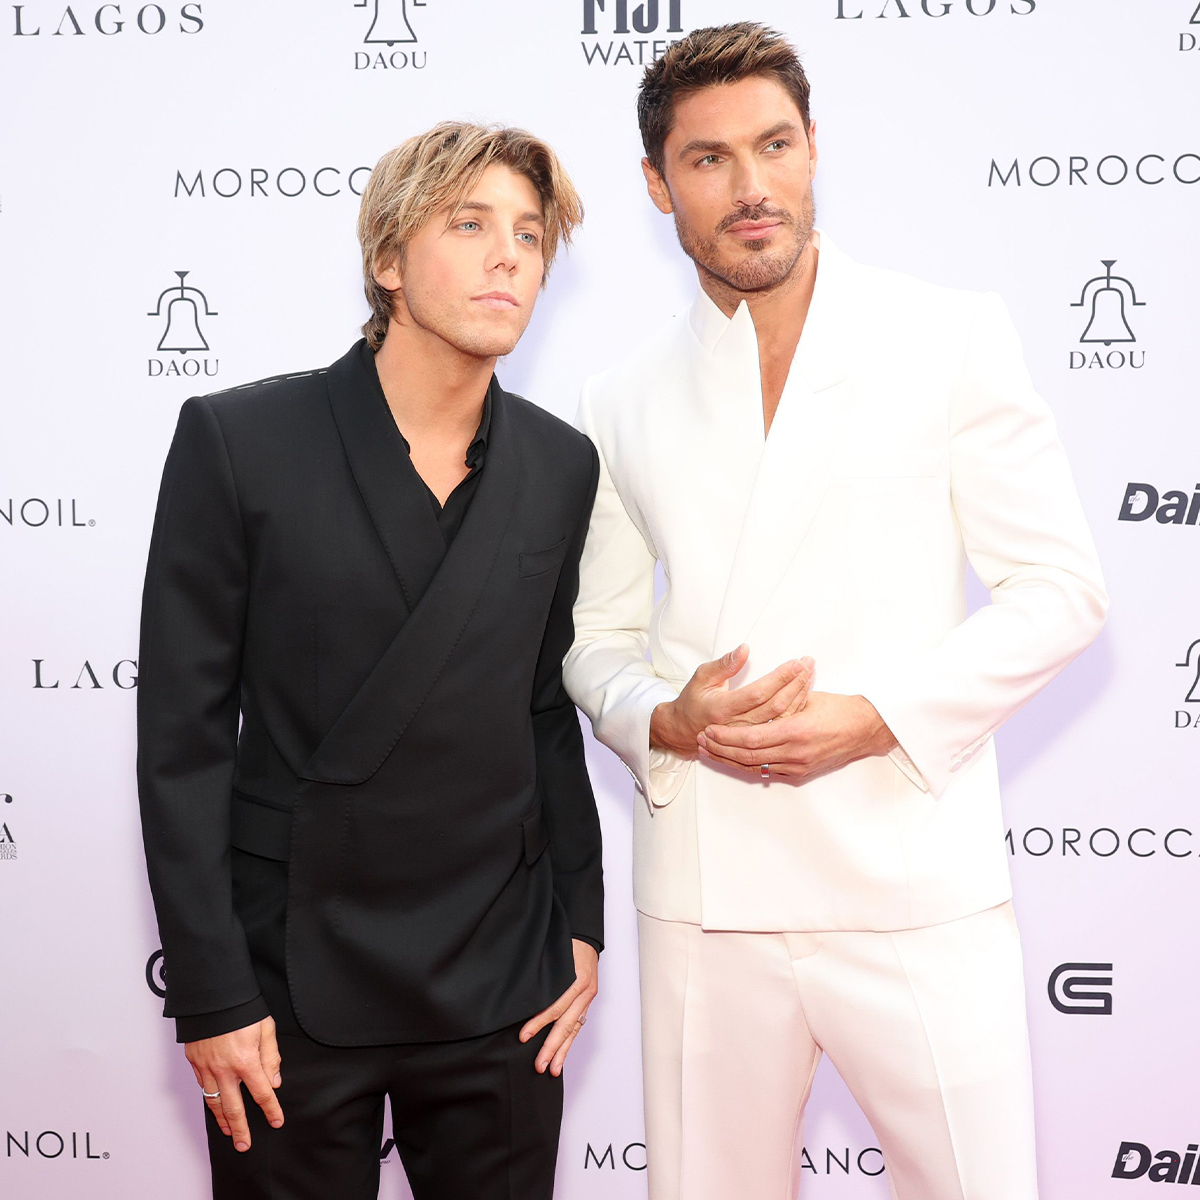 Hairstylist Chris Appleton Files for Divorce From Lukas Gage